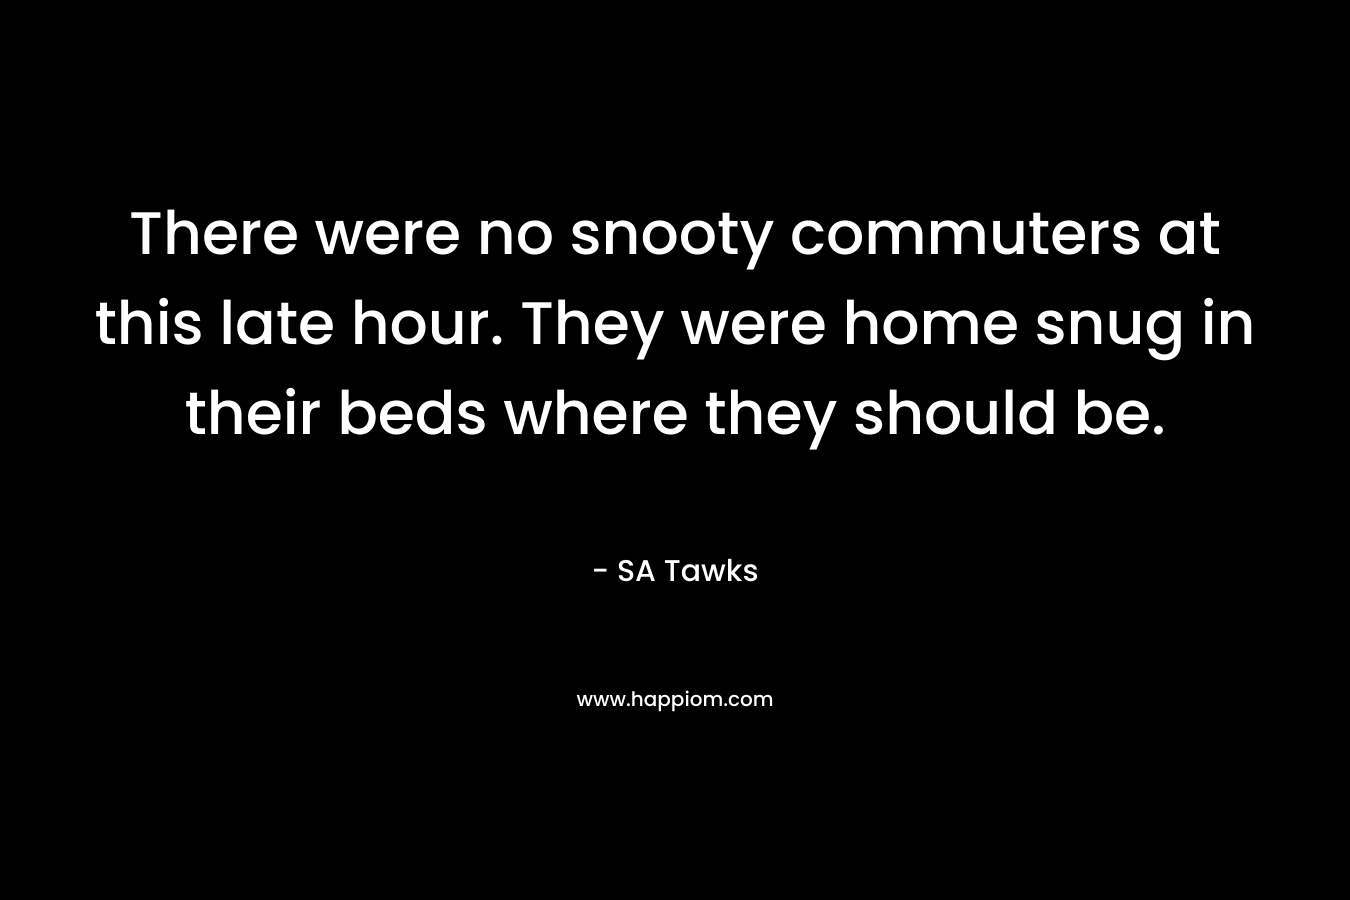 There were no snooty commuters at this late hour. They were home snug in their beds where they should be. – SA Tawks